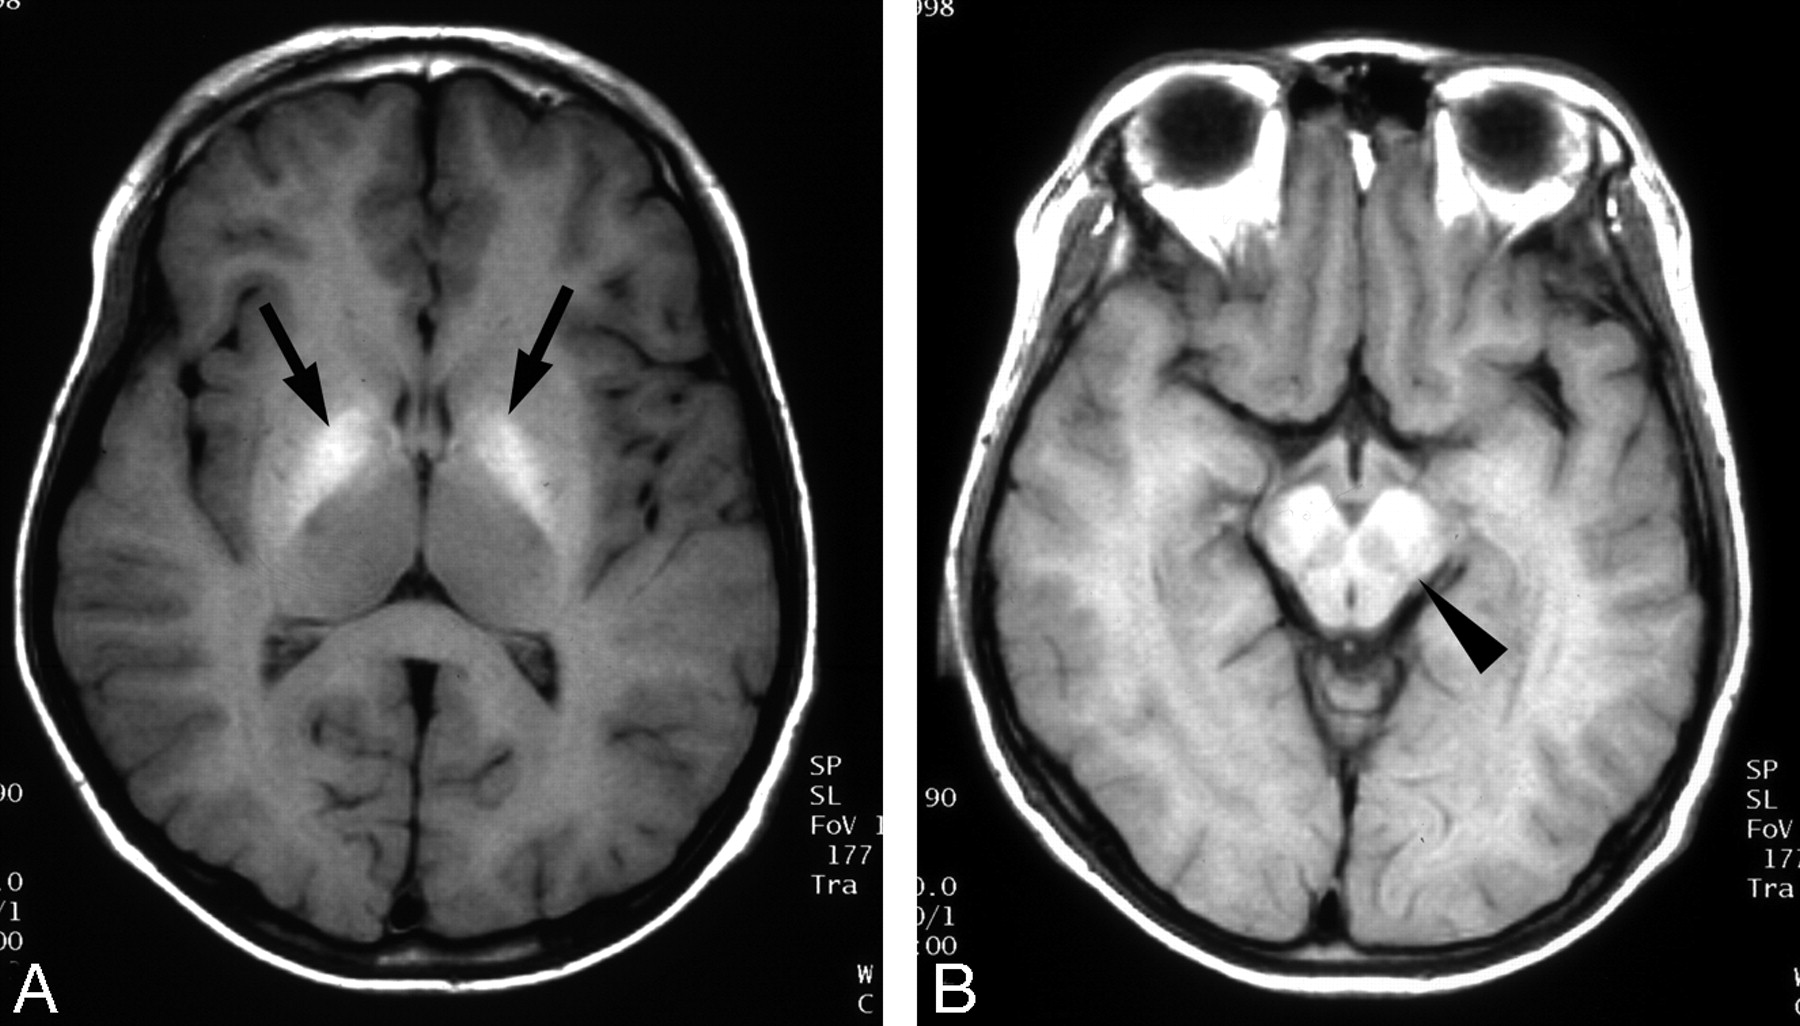 MRI of a patient with Wilson disease showing bilateral signal intensity in the globus pallidus (arrows) and the midbrain (arrowhead, source)